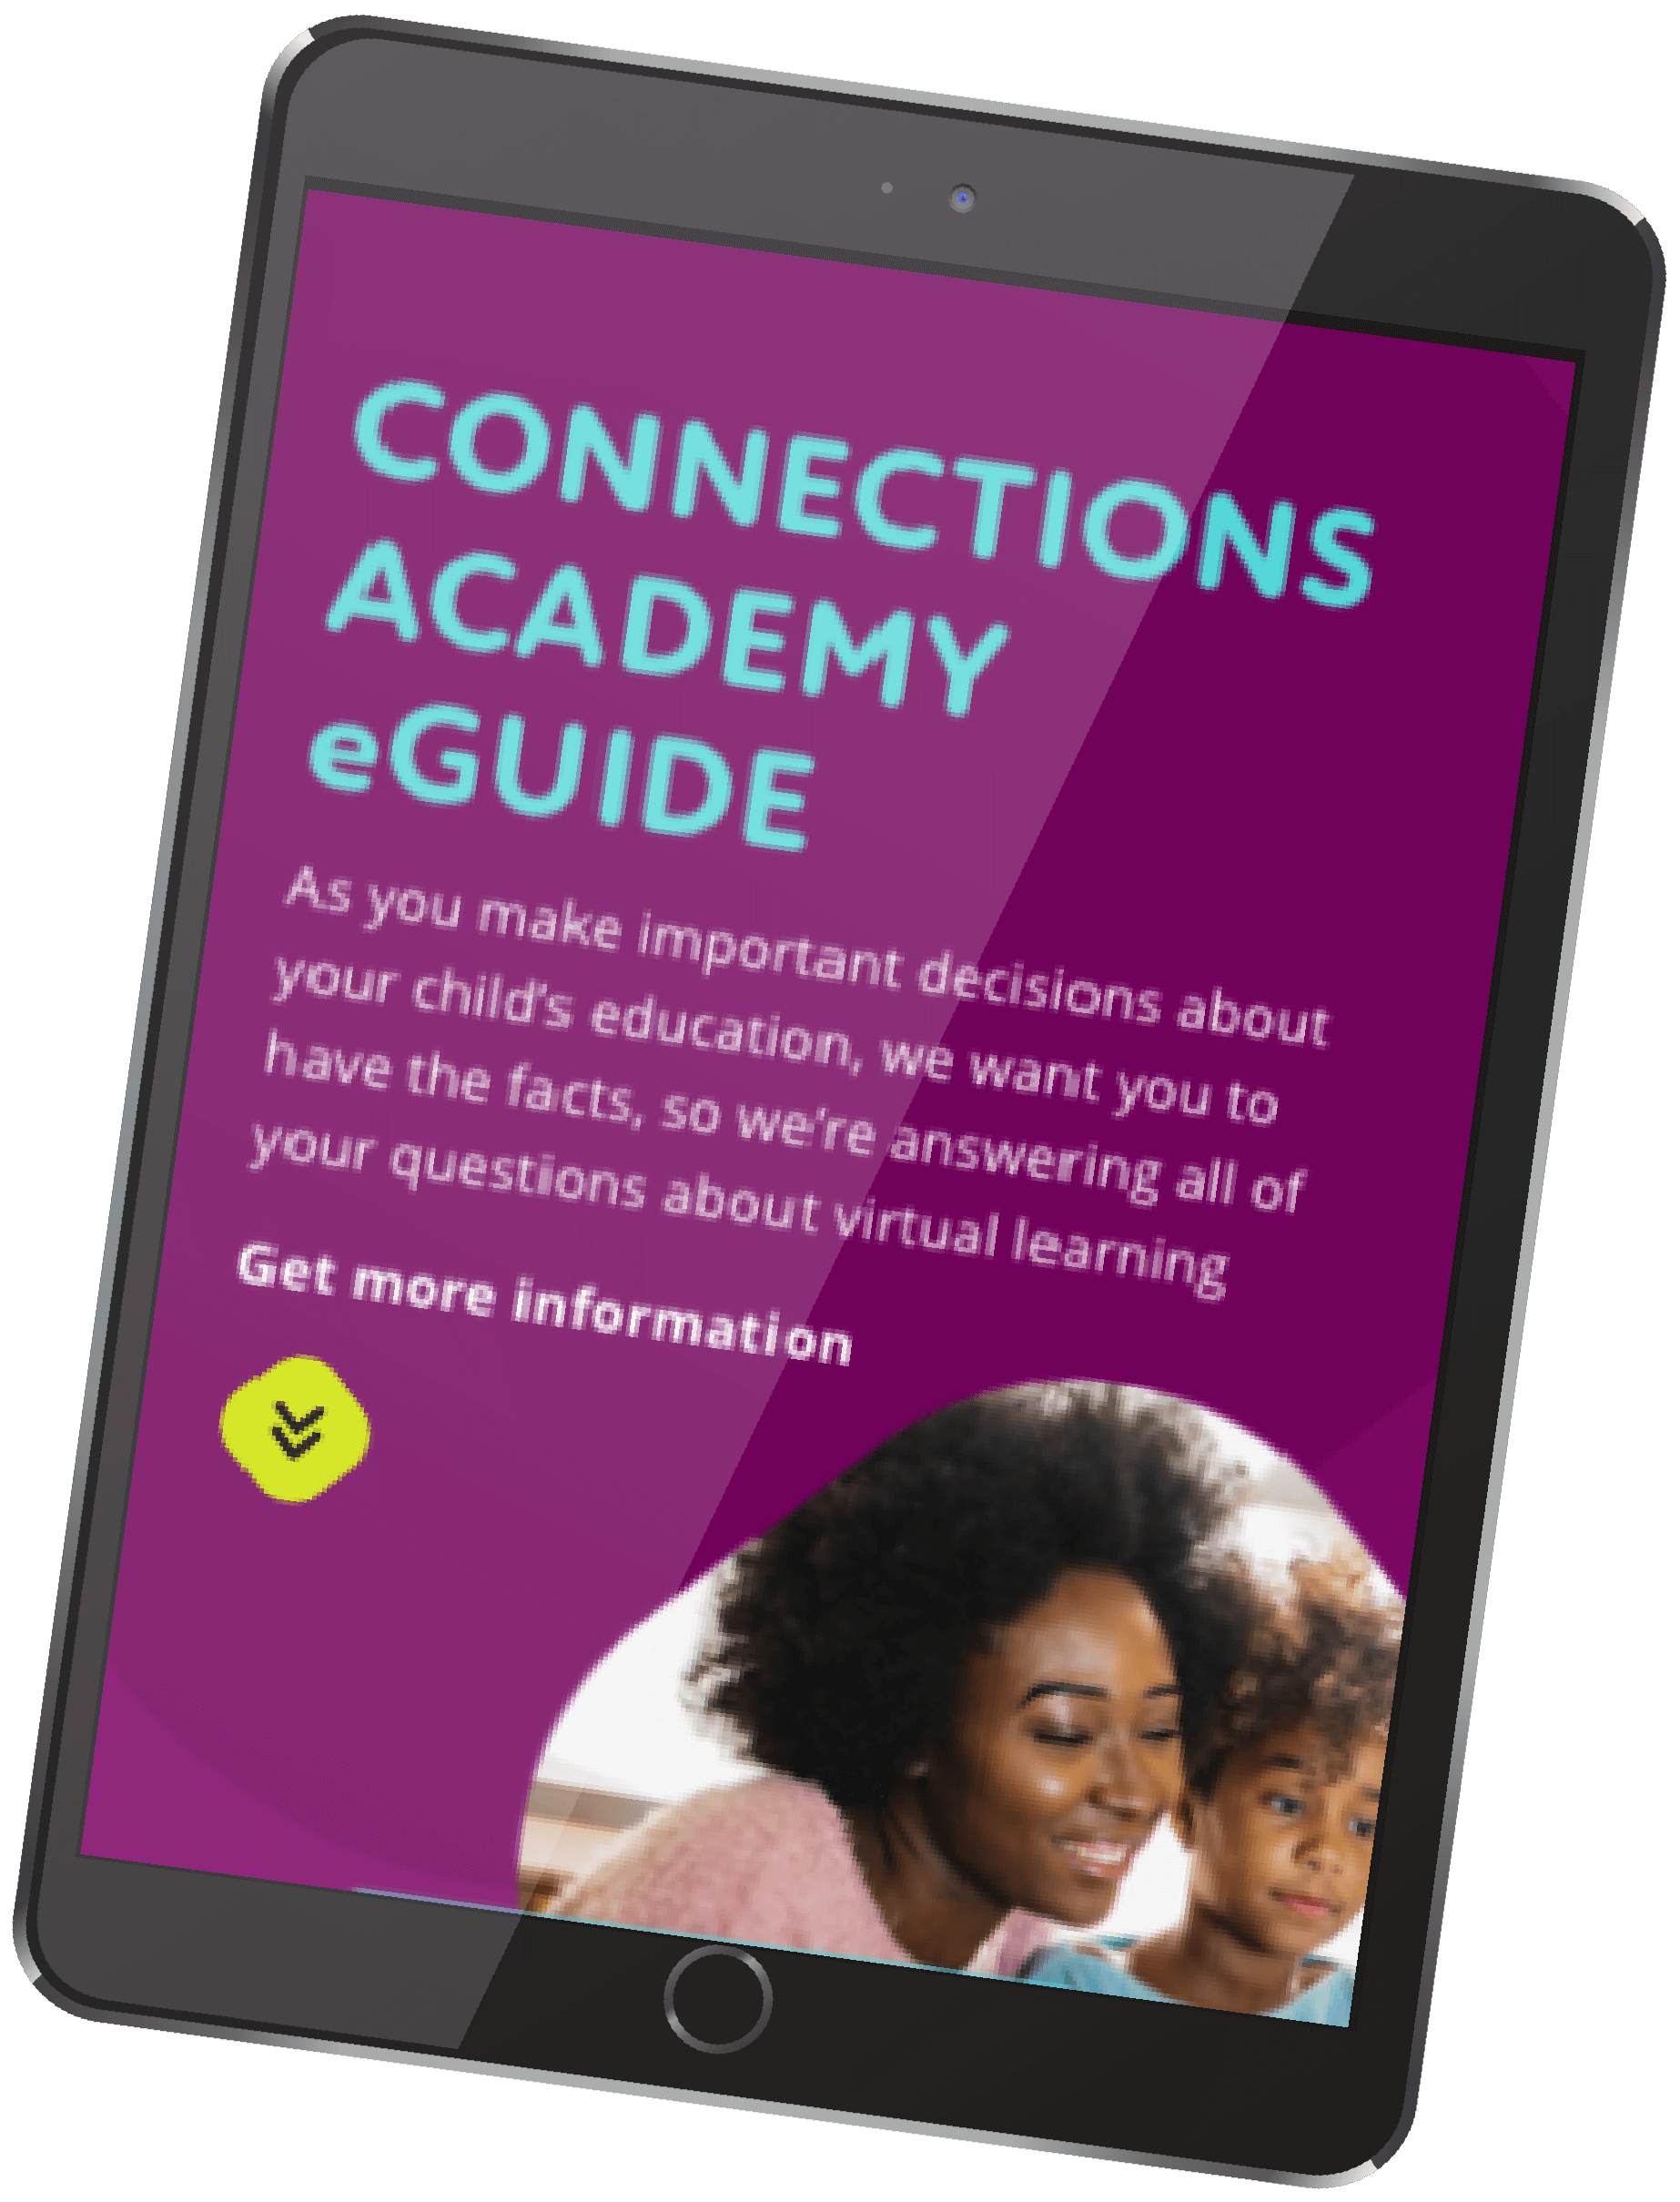 Snapshot of the Connections Academy E-Guide